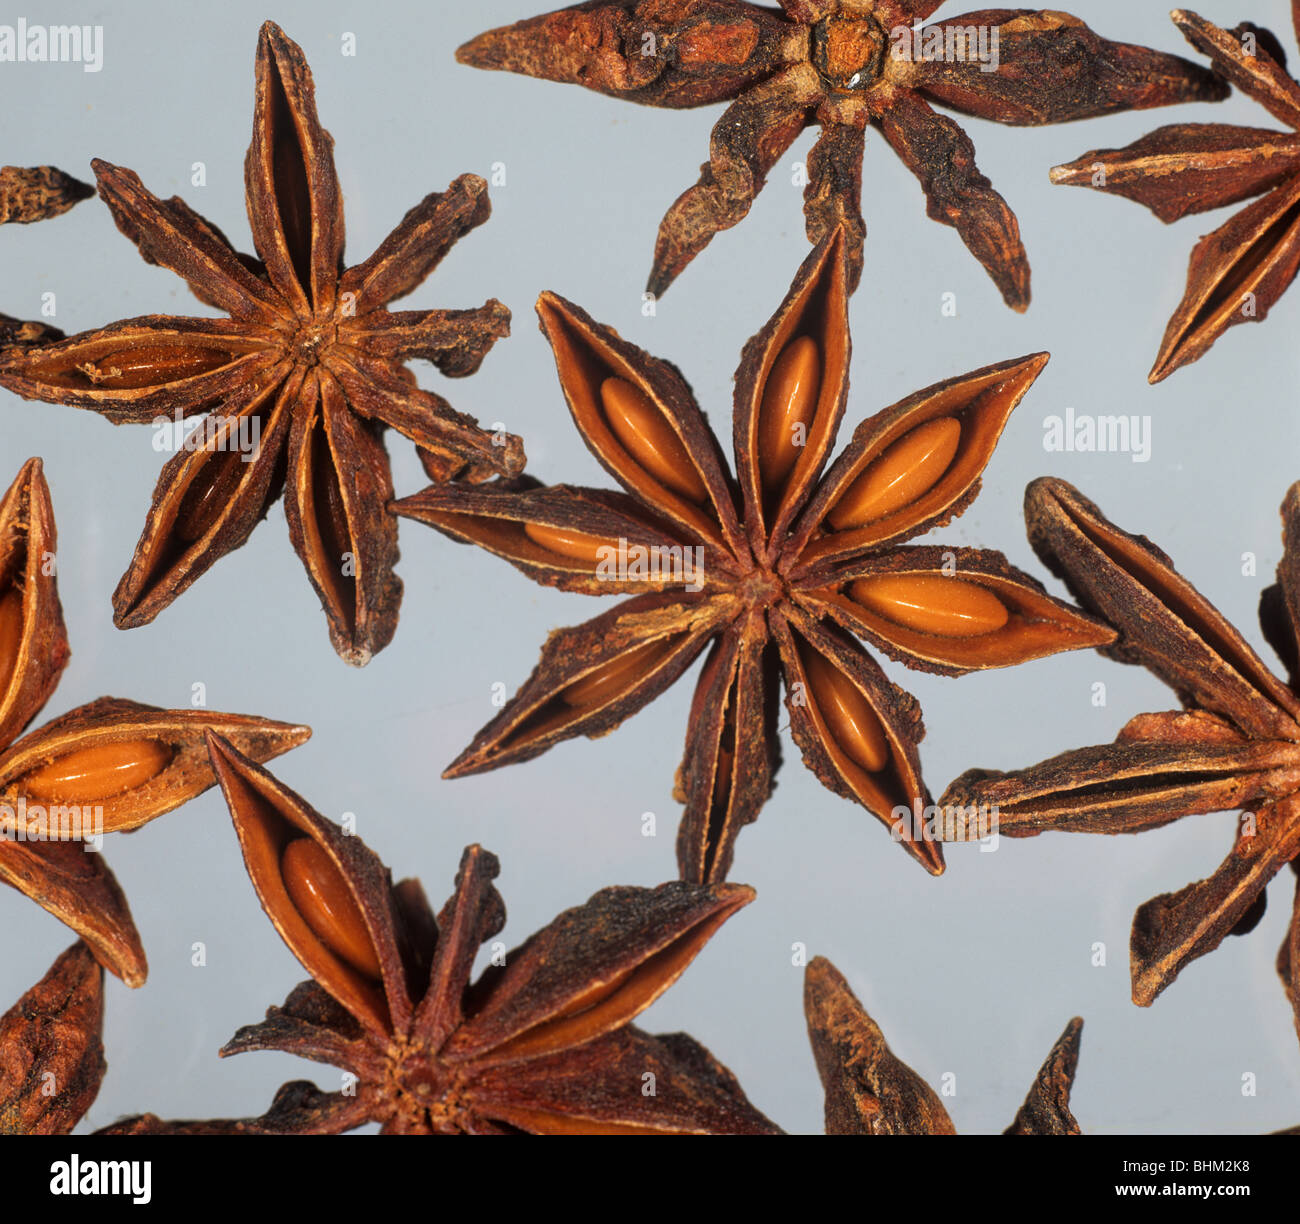 Star anise fruit (Pimpinella anisum) as purchased for cooking Stock Photo